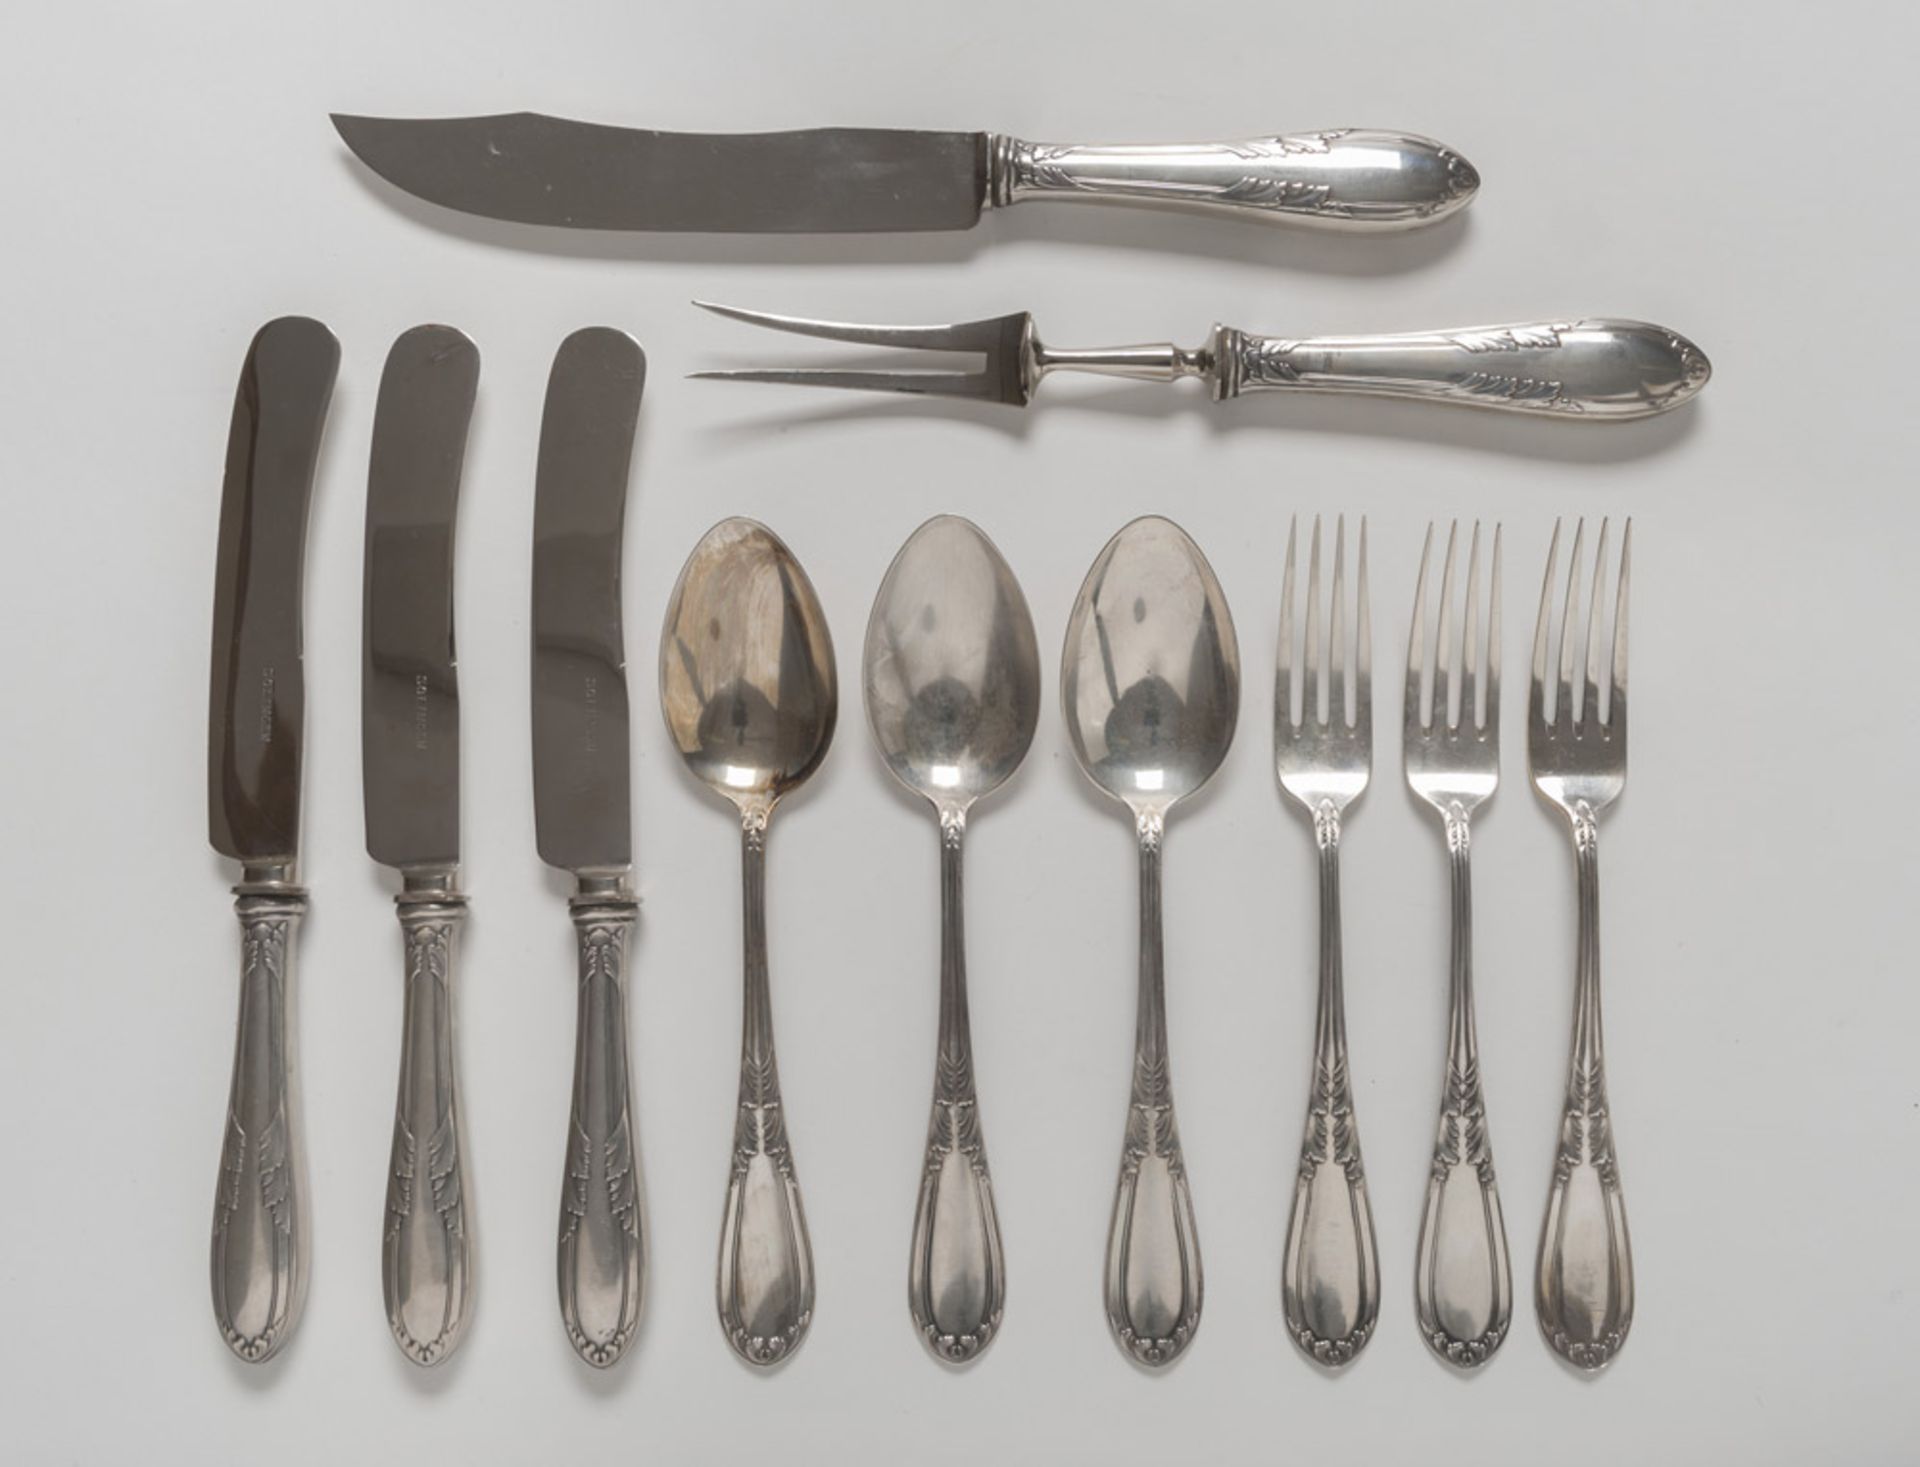 SILVER CUTLERY, PUNCH KINGDOM OF ITALY VERCELLI, LATE 19TH CENTURY with chiseled handles. Consisting